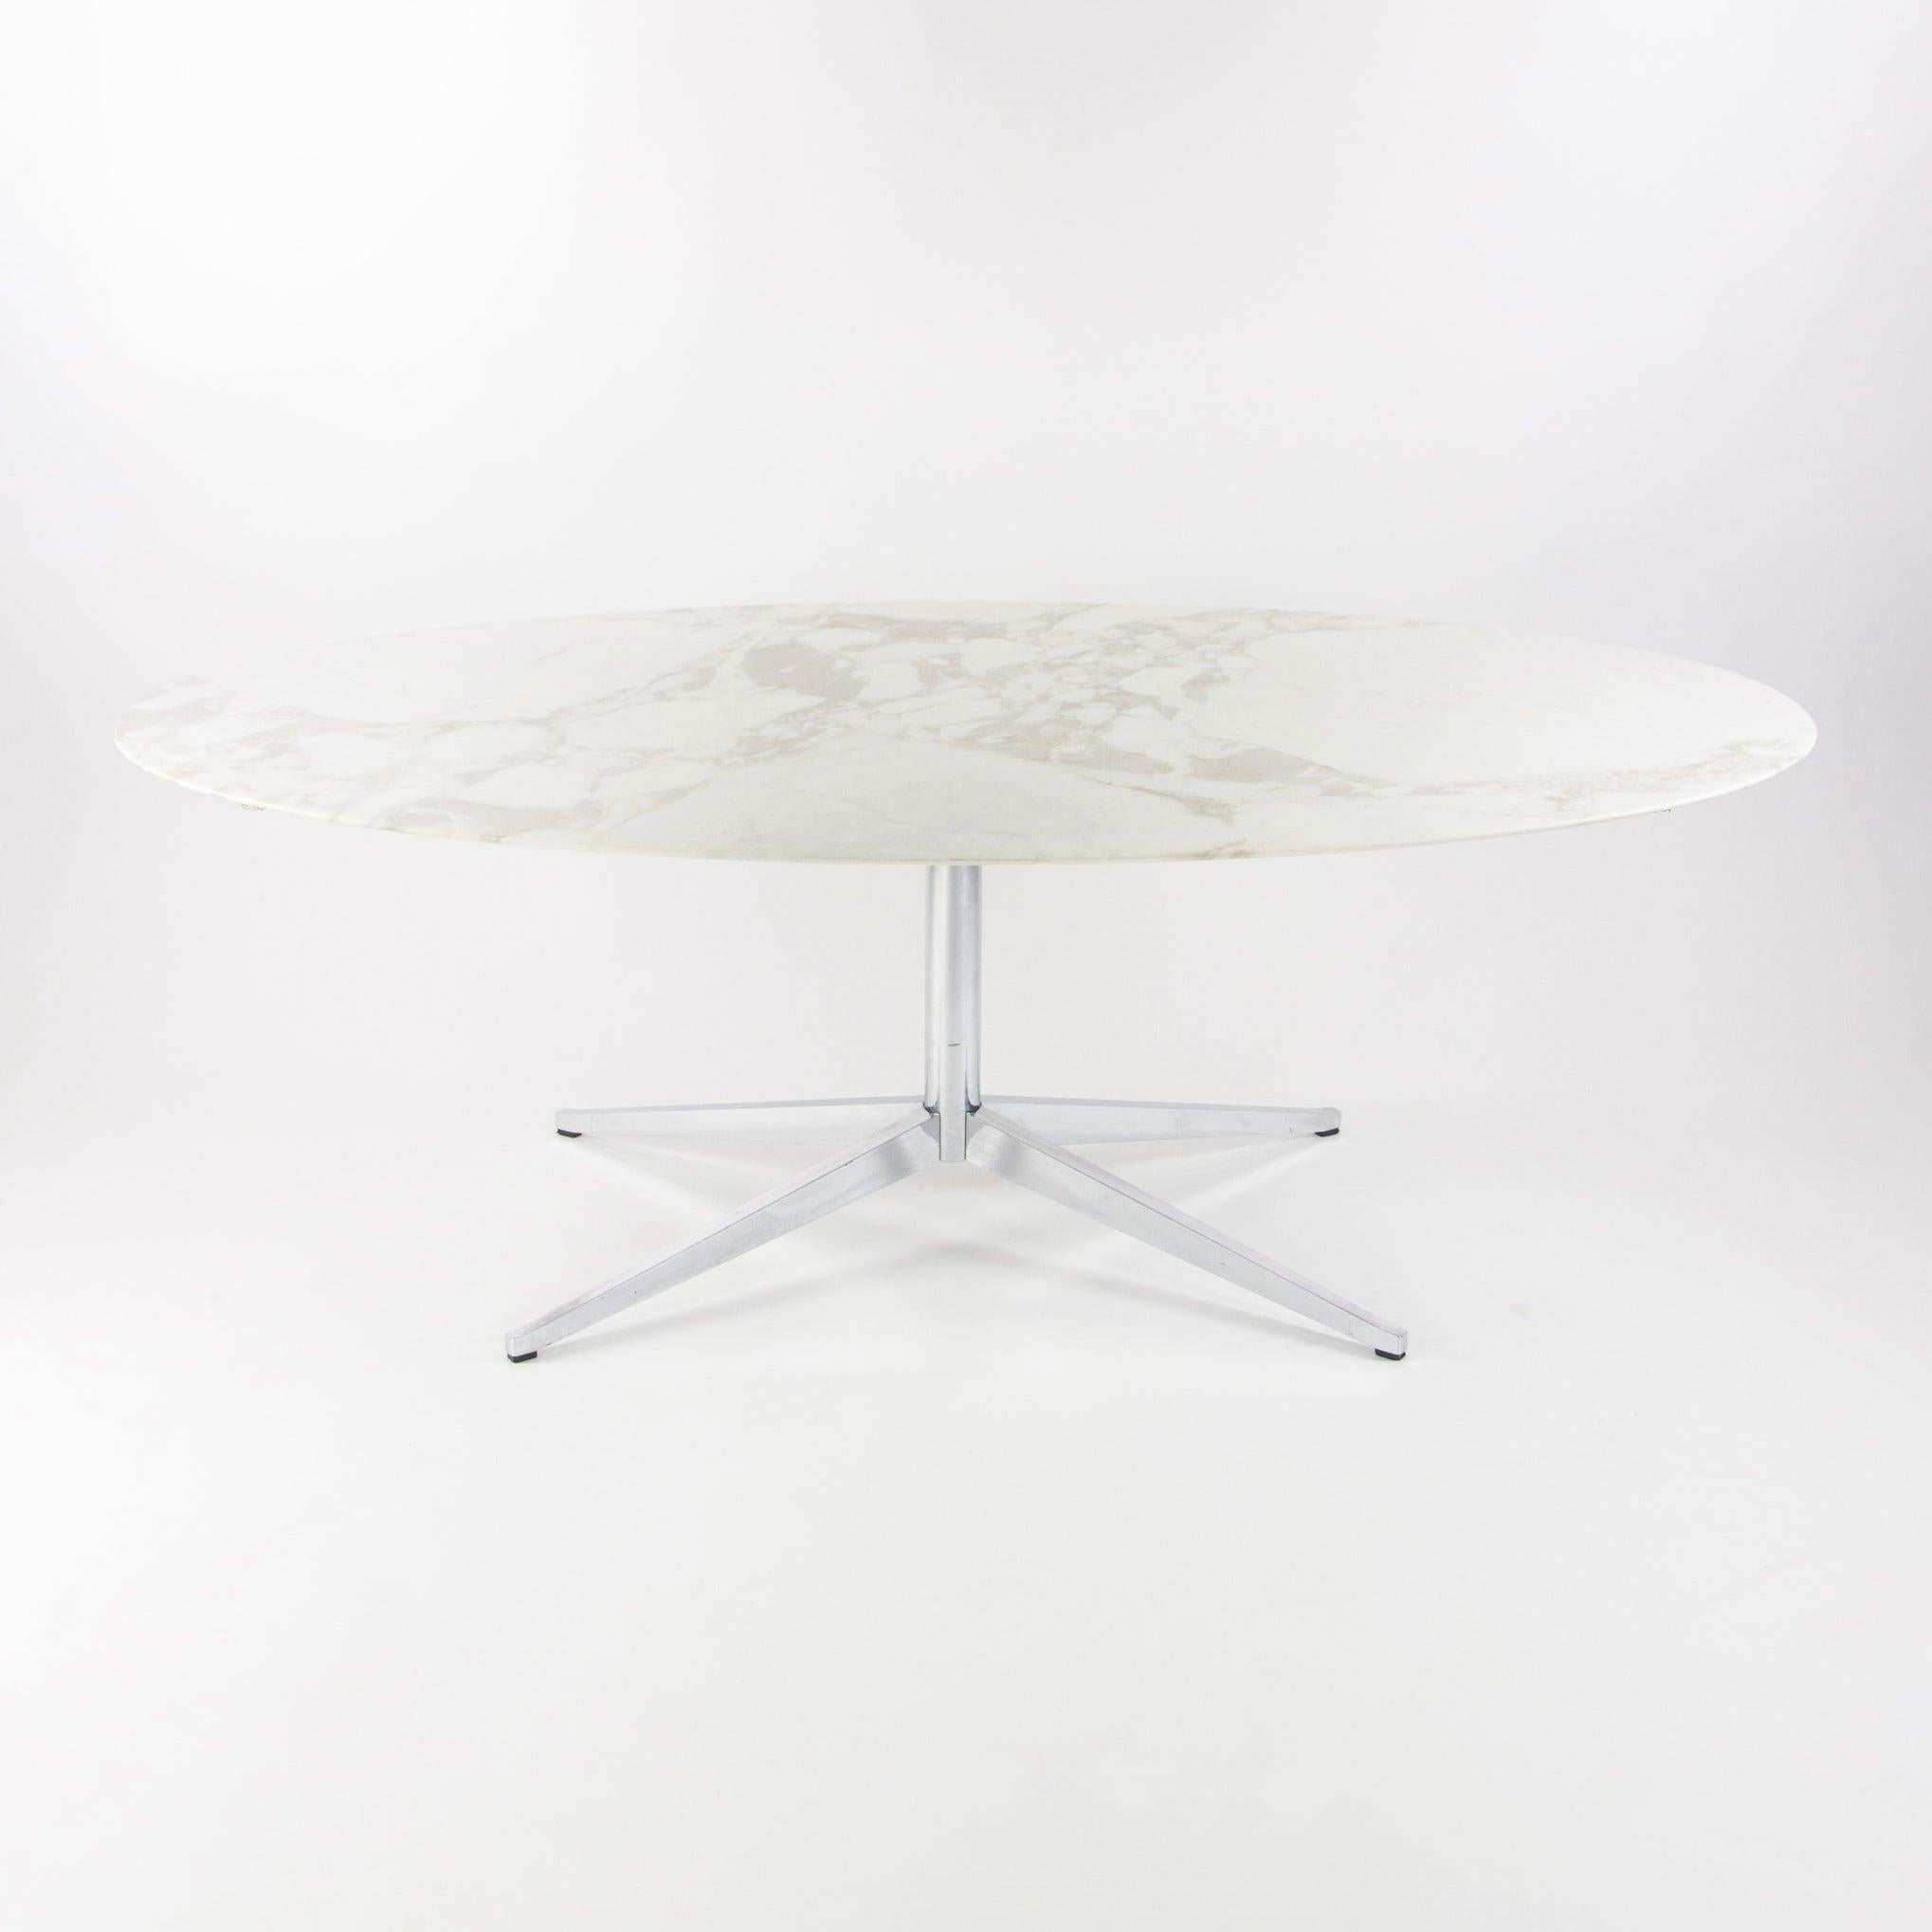 This is an original circa 2007 production Florence Knoll marble dining / conference table. The table was produced by Knoll international and is in very nice condition. The top has normal light wear and was used as a conference table. This example is